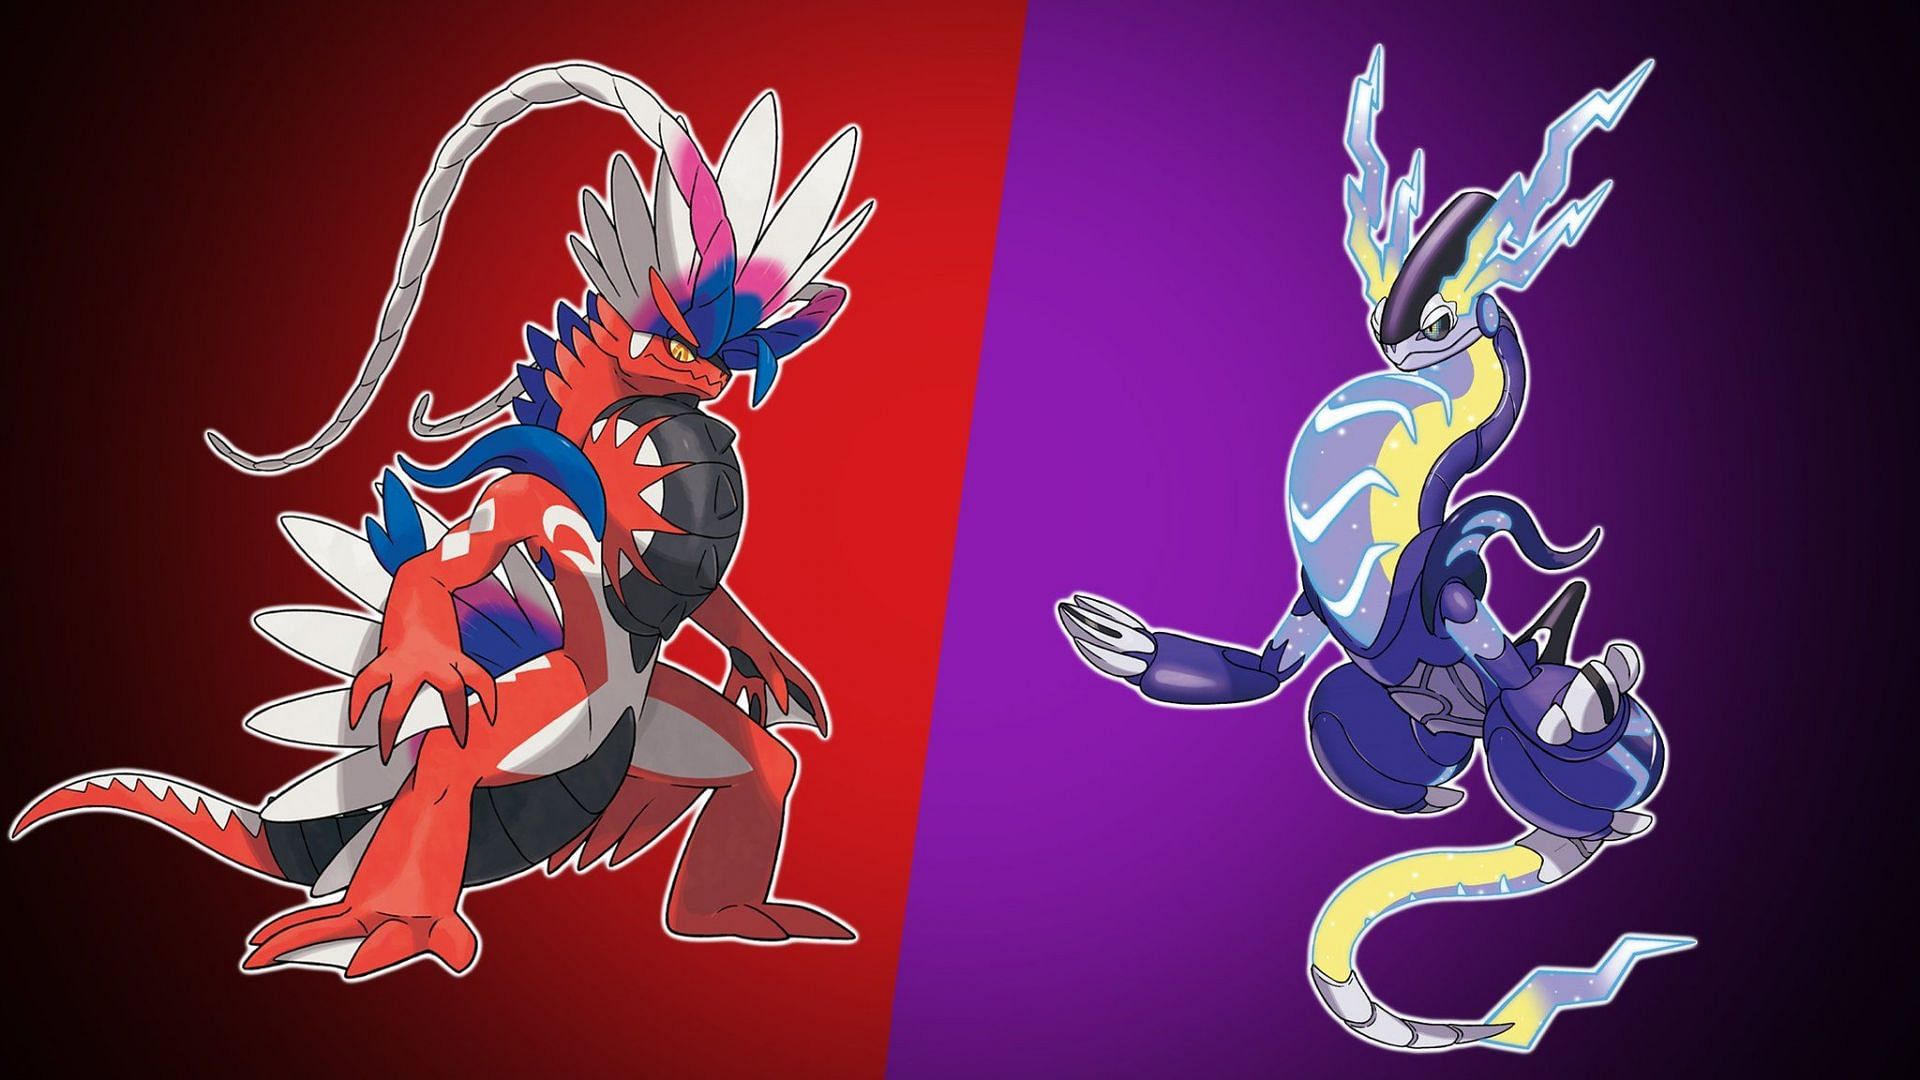 Official artwork for Pokemon Scarlet and Violet featuring Miraidon and Koraidon (Image via The Pokemon Company)